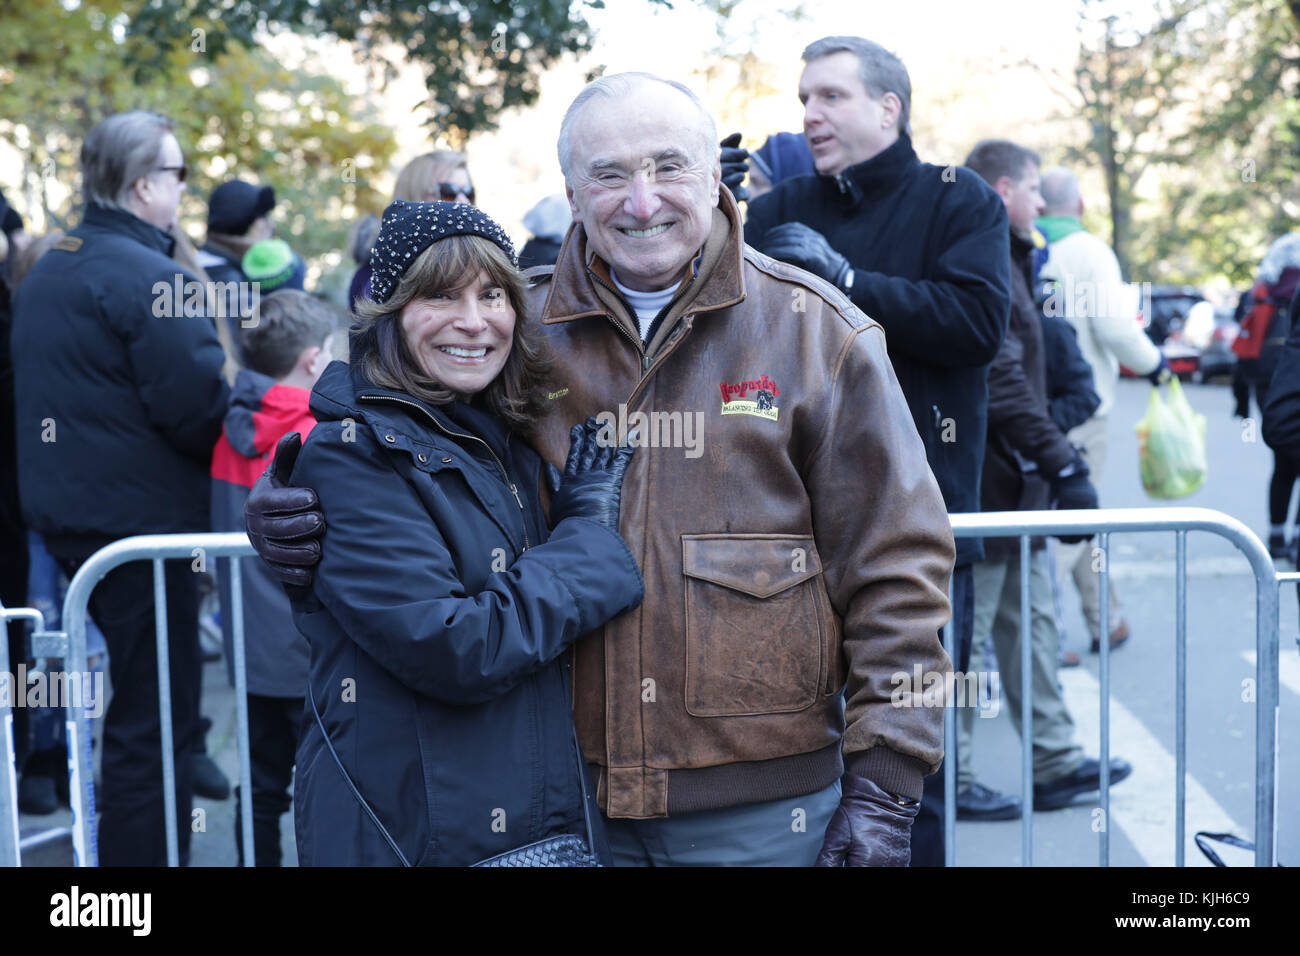 November 23, 2017 - New York, NY, USA - Central Park West, New York, USA, November 23 2017 - Ex-Police Commissioner William Bratton attends the 91st Annual Macy's Thanksgiving Day Parade today in New York City..Photo: Luiz Rampelotto/EuropaNewswire (Credit Image: © Luiz Rampelotto via ZUMA Wire) Stock Photo